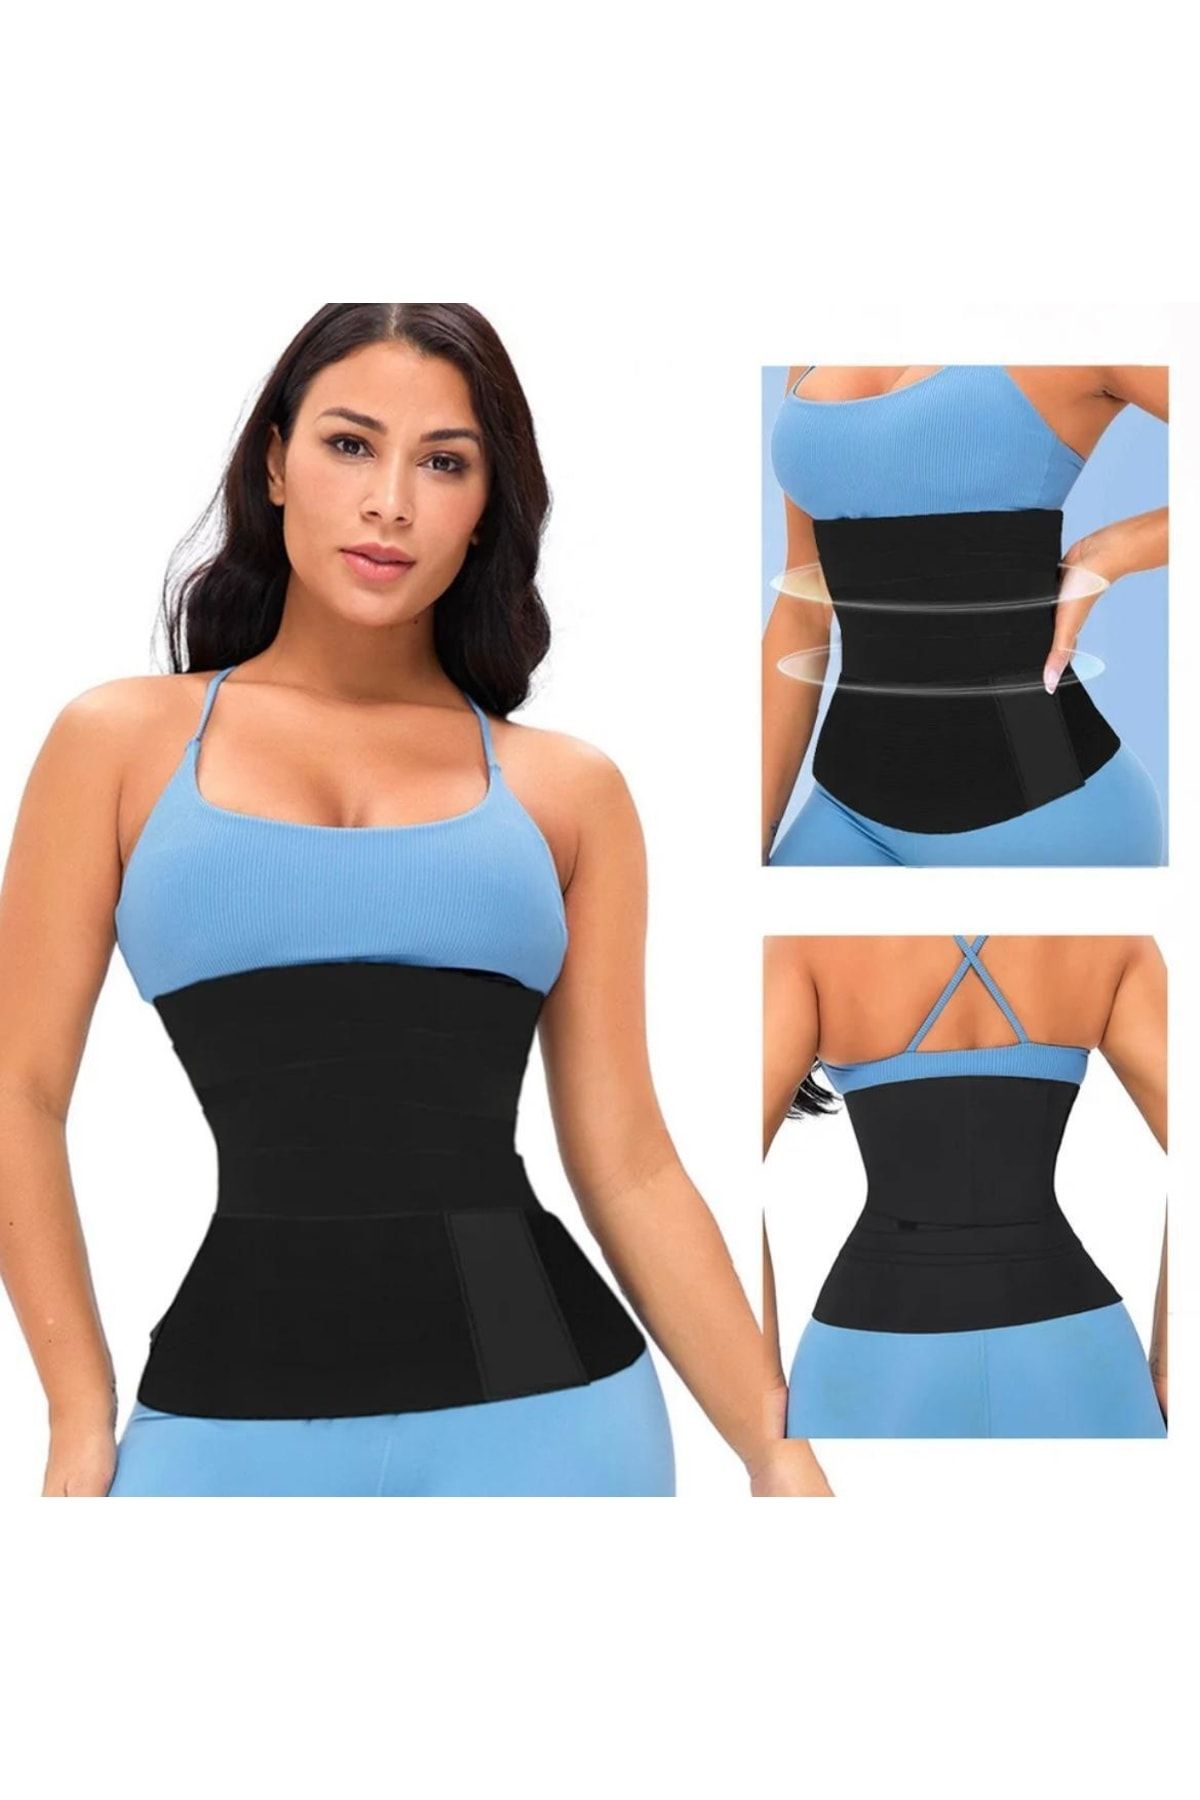 FİT WOMEN Slimming Firming Wrap Waist Bandage Corset Wrapped